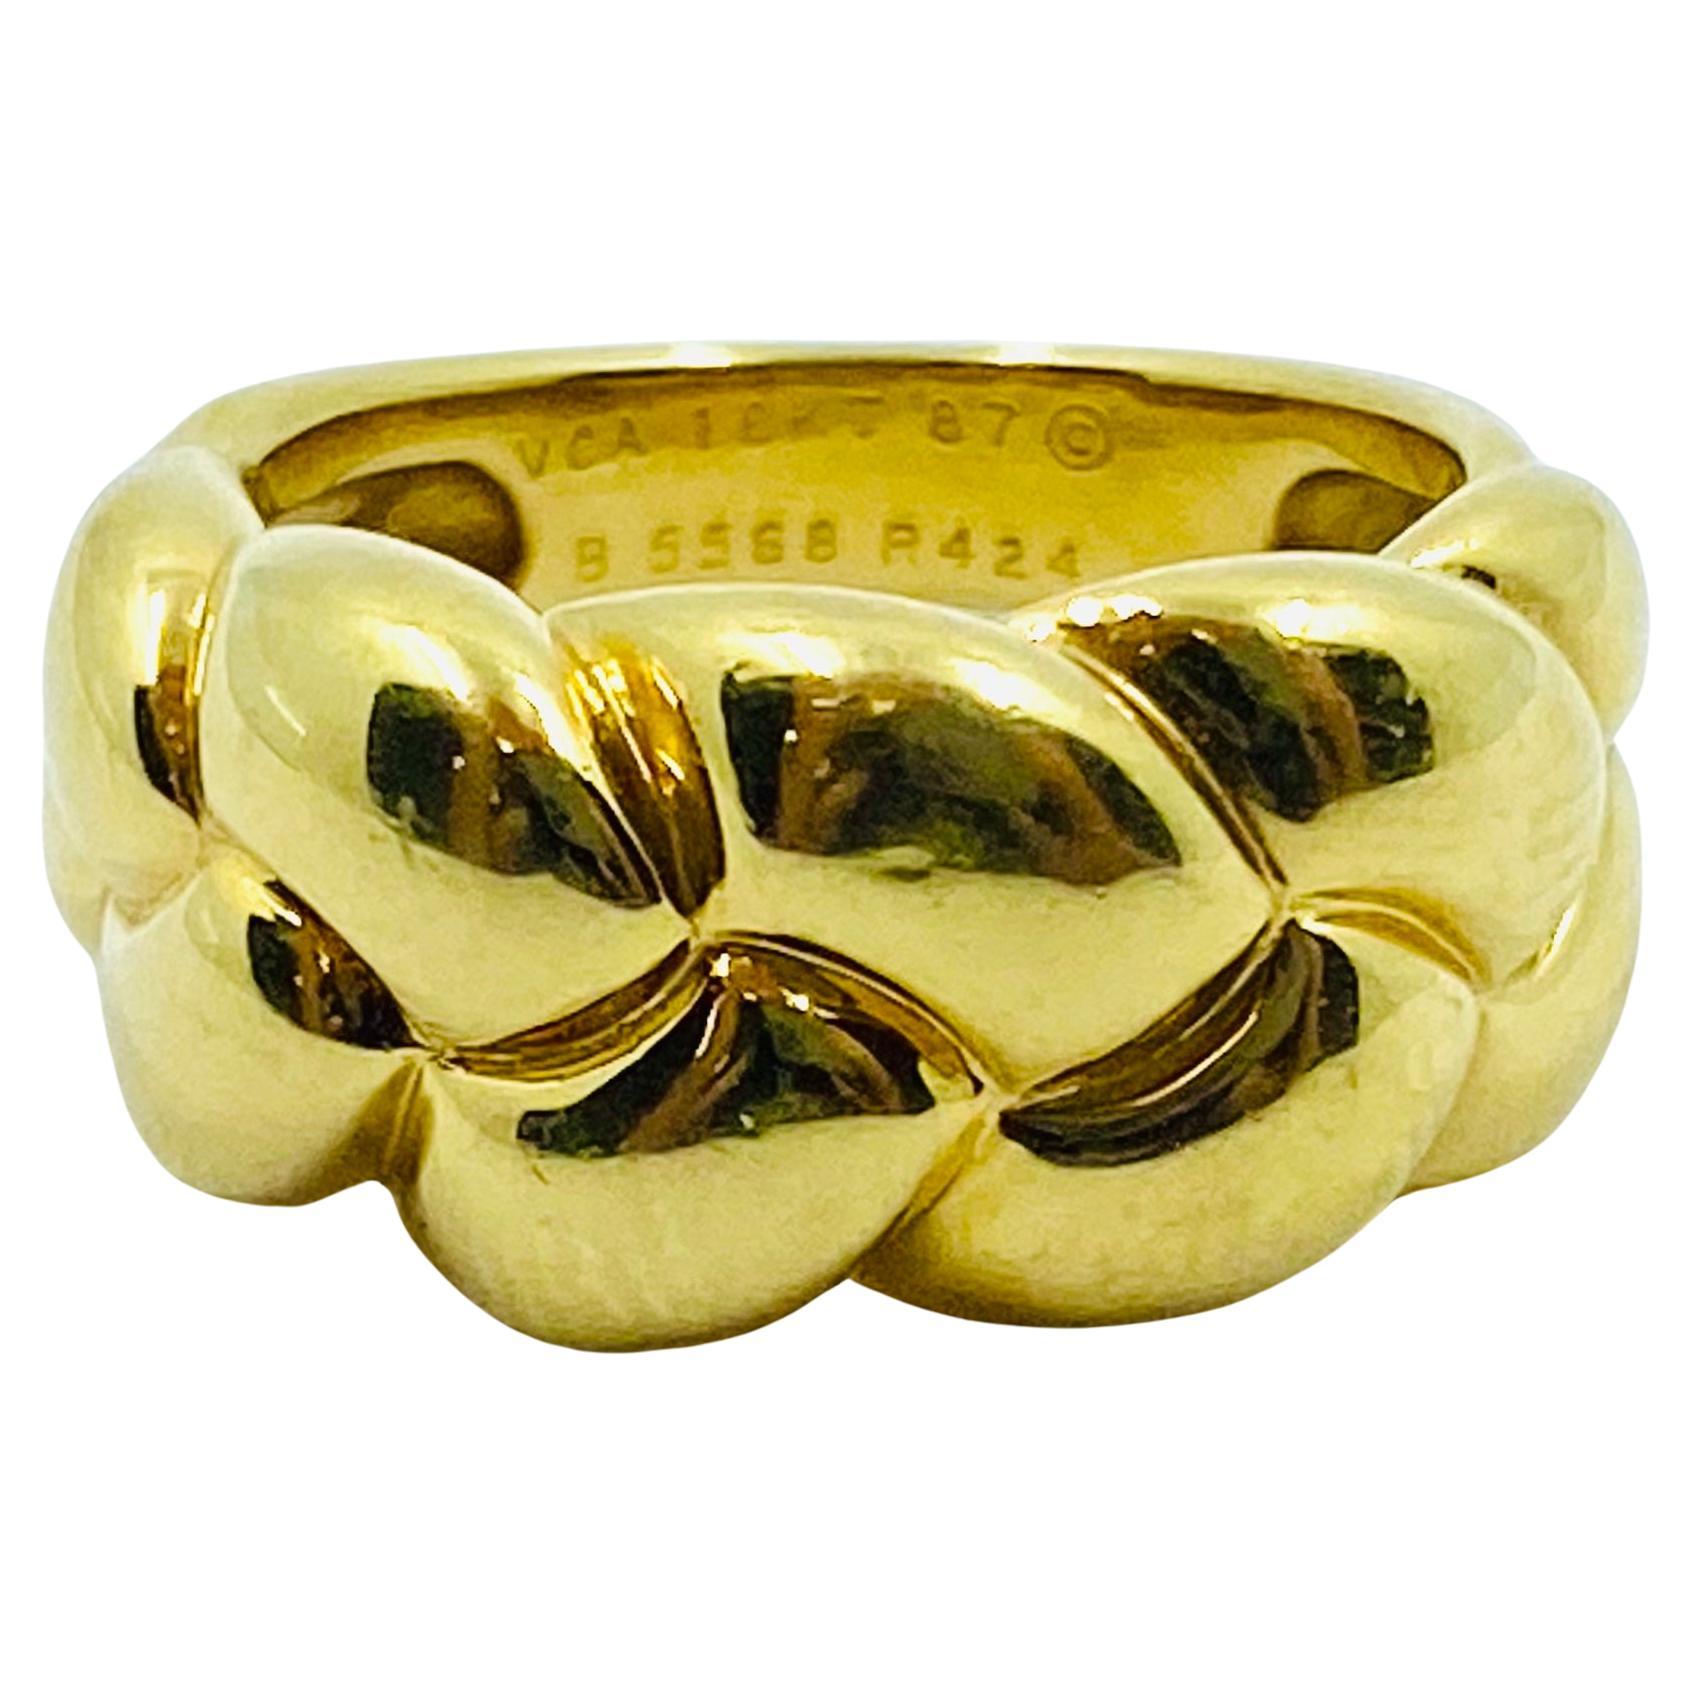 Vintage Van Cleef & Arpels Gold Braided Band Ring In Excellent Condition For Sale In Beverly Hills, CA